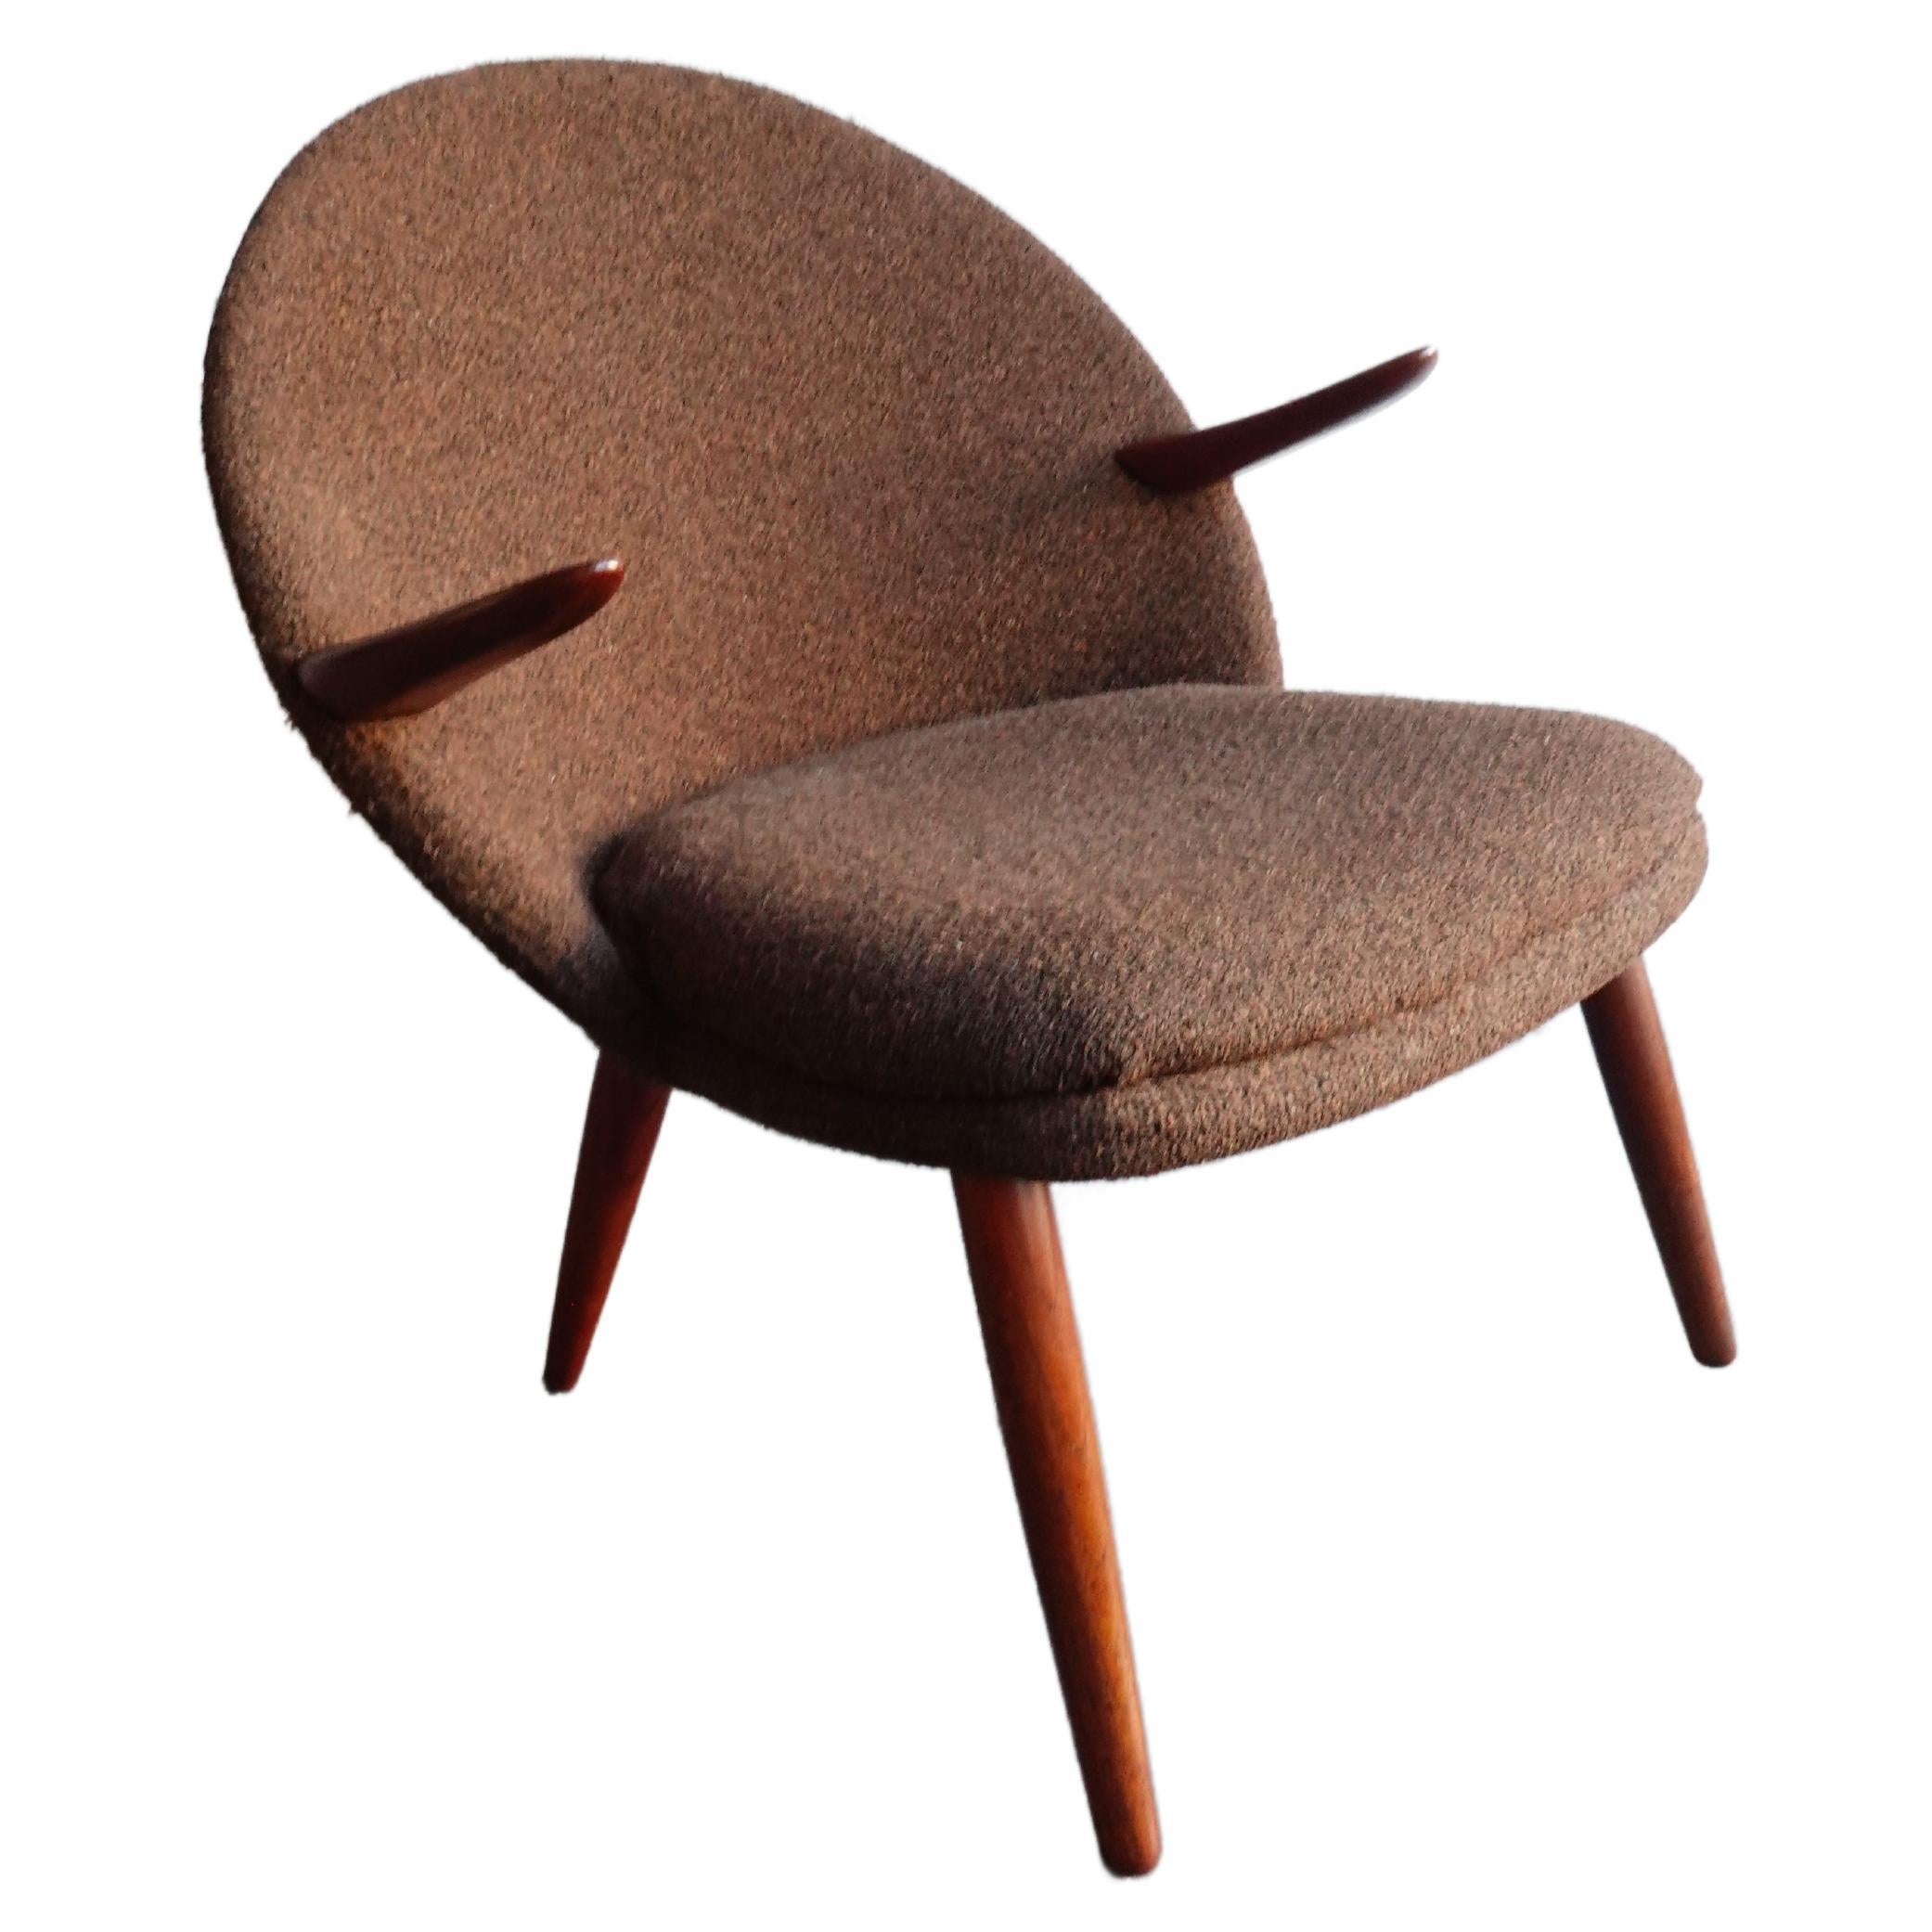 A lovely example of Kurt Olsen’s celebrated ‘Penguin’ chair in original boiled wool upholstery and sculpted teak—excellent vintage condition. Stunning construction featuring floating arms well positioned ergonomically speaking, and a stable splayed